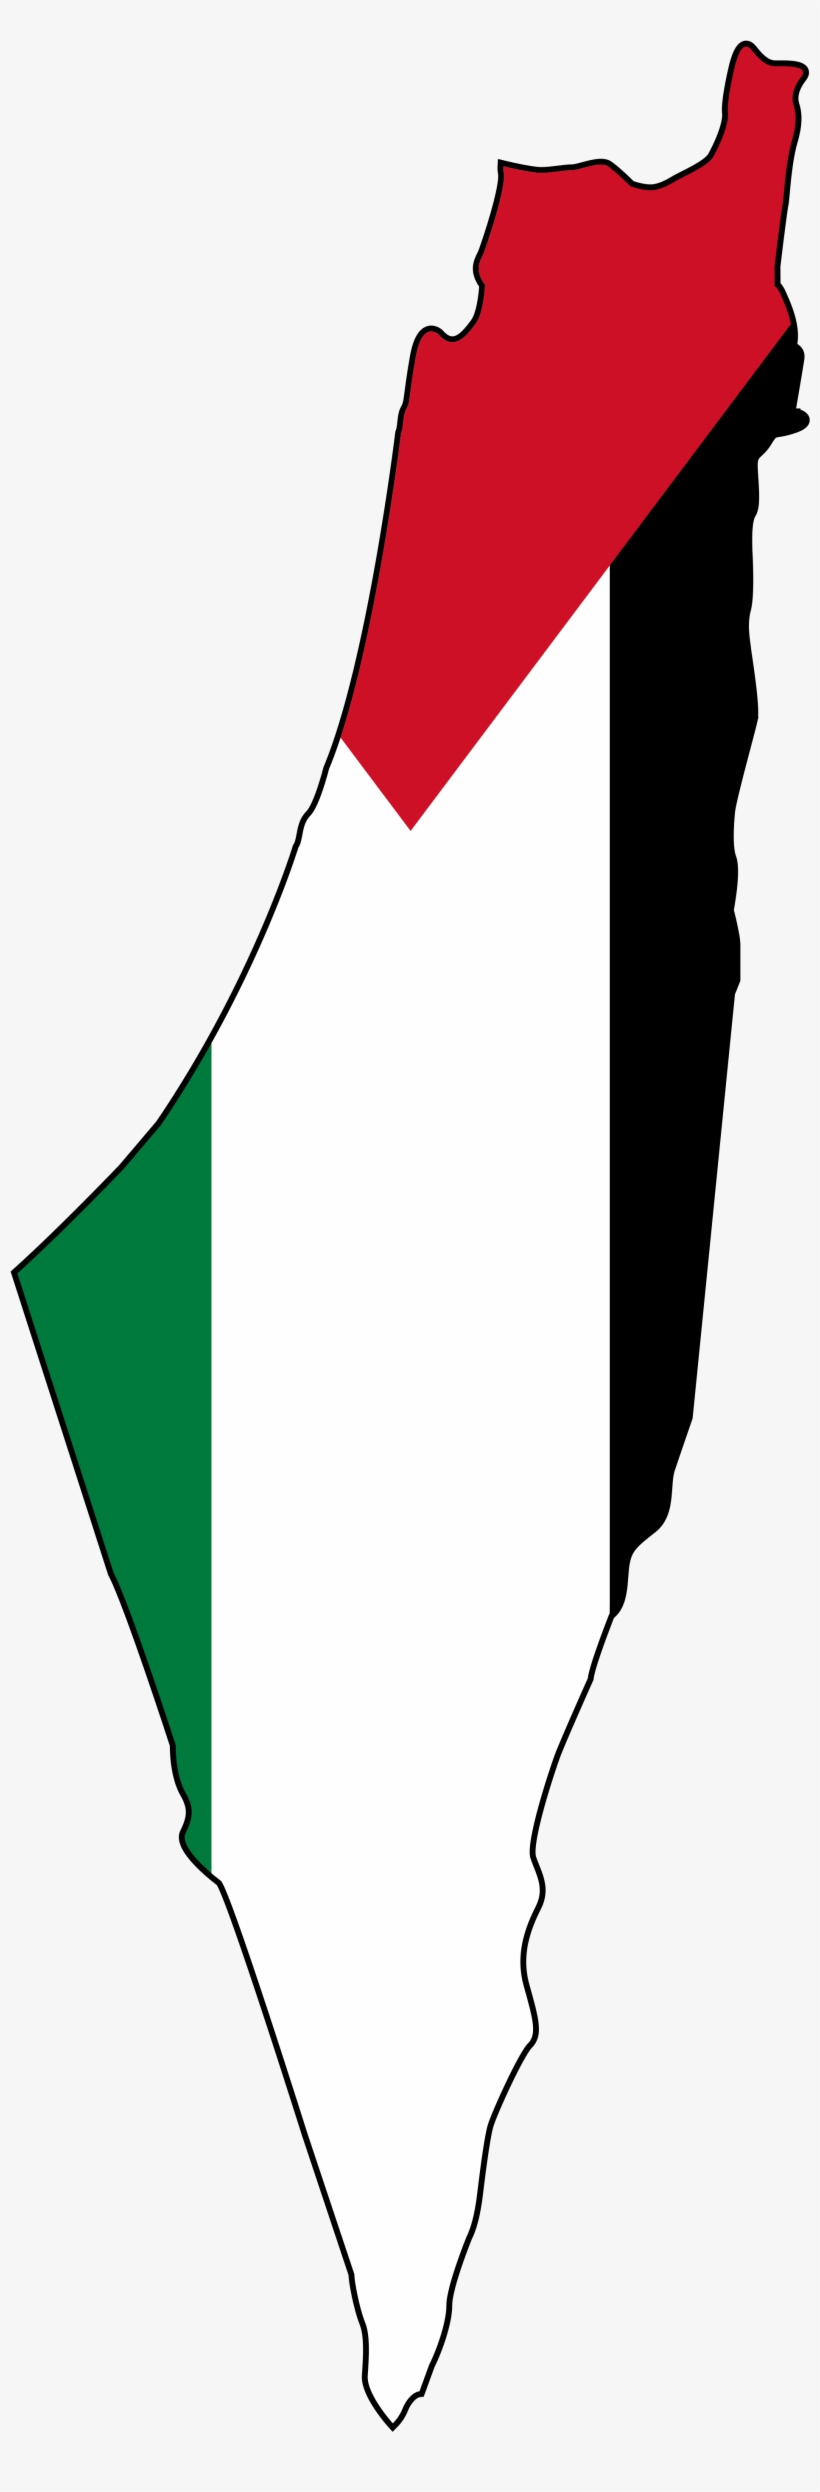 Get Palestine Flag - Palestine Map With Flag, transparent png #193124